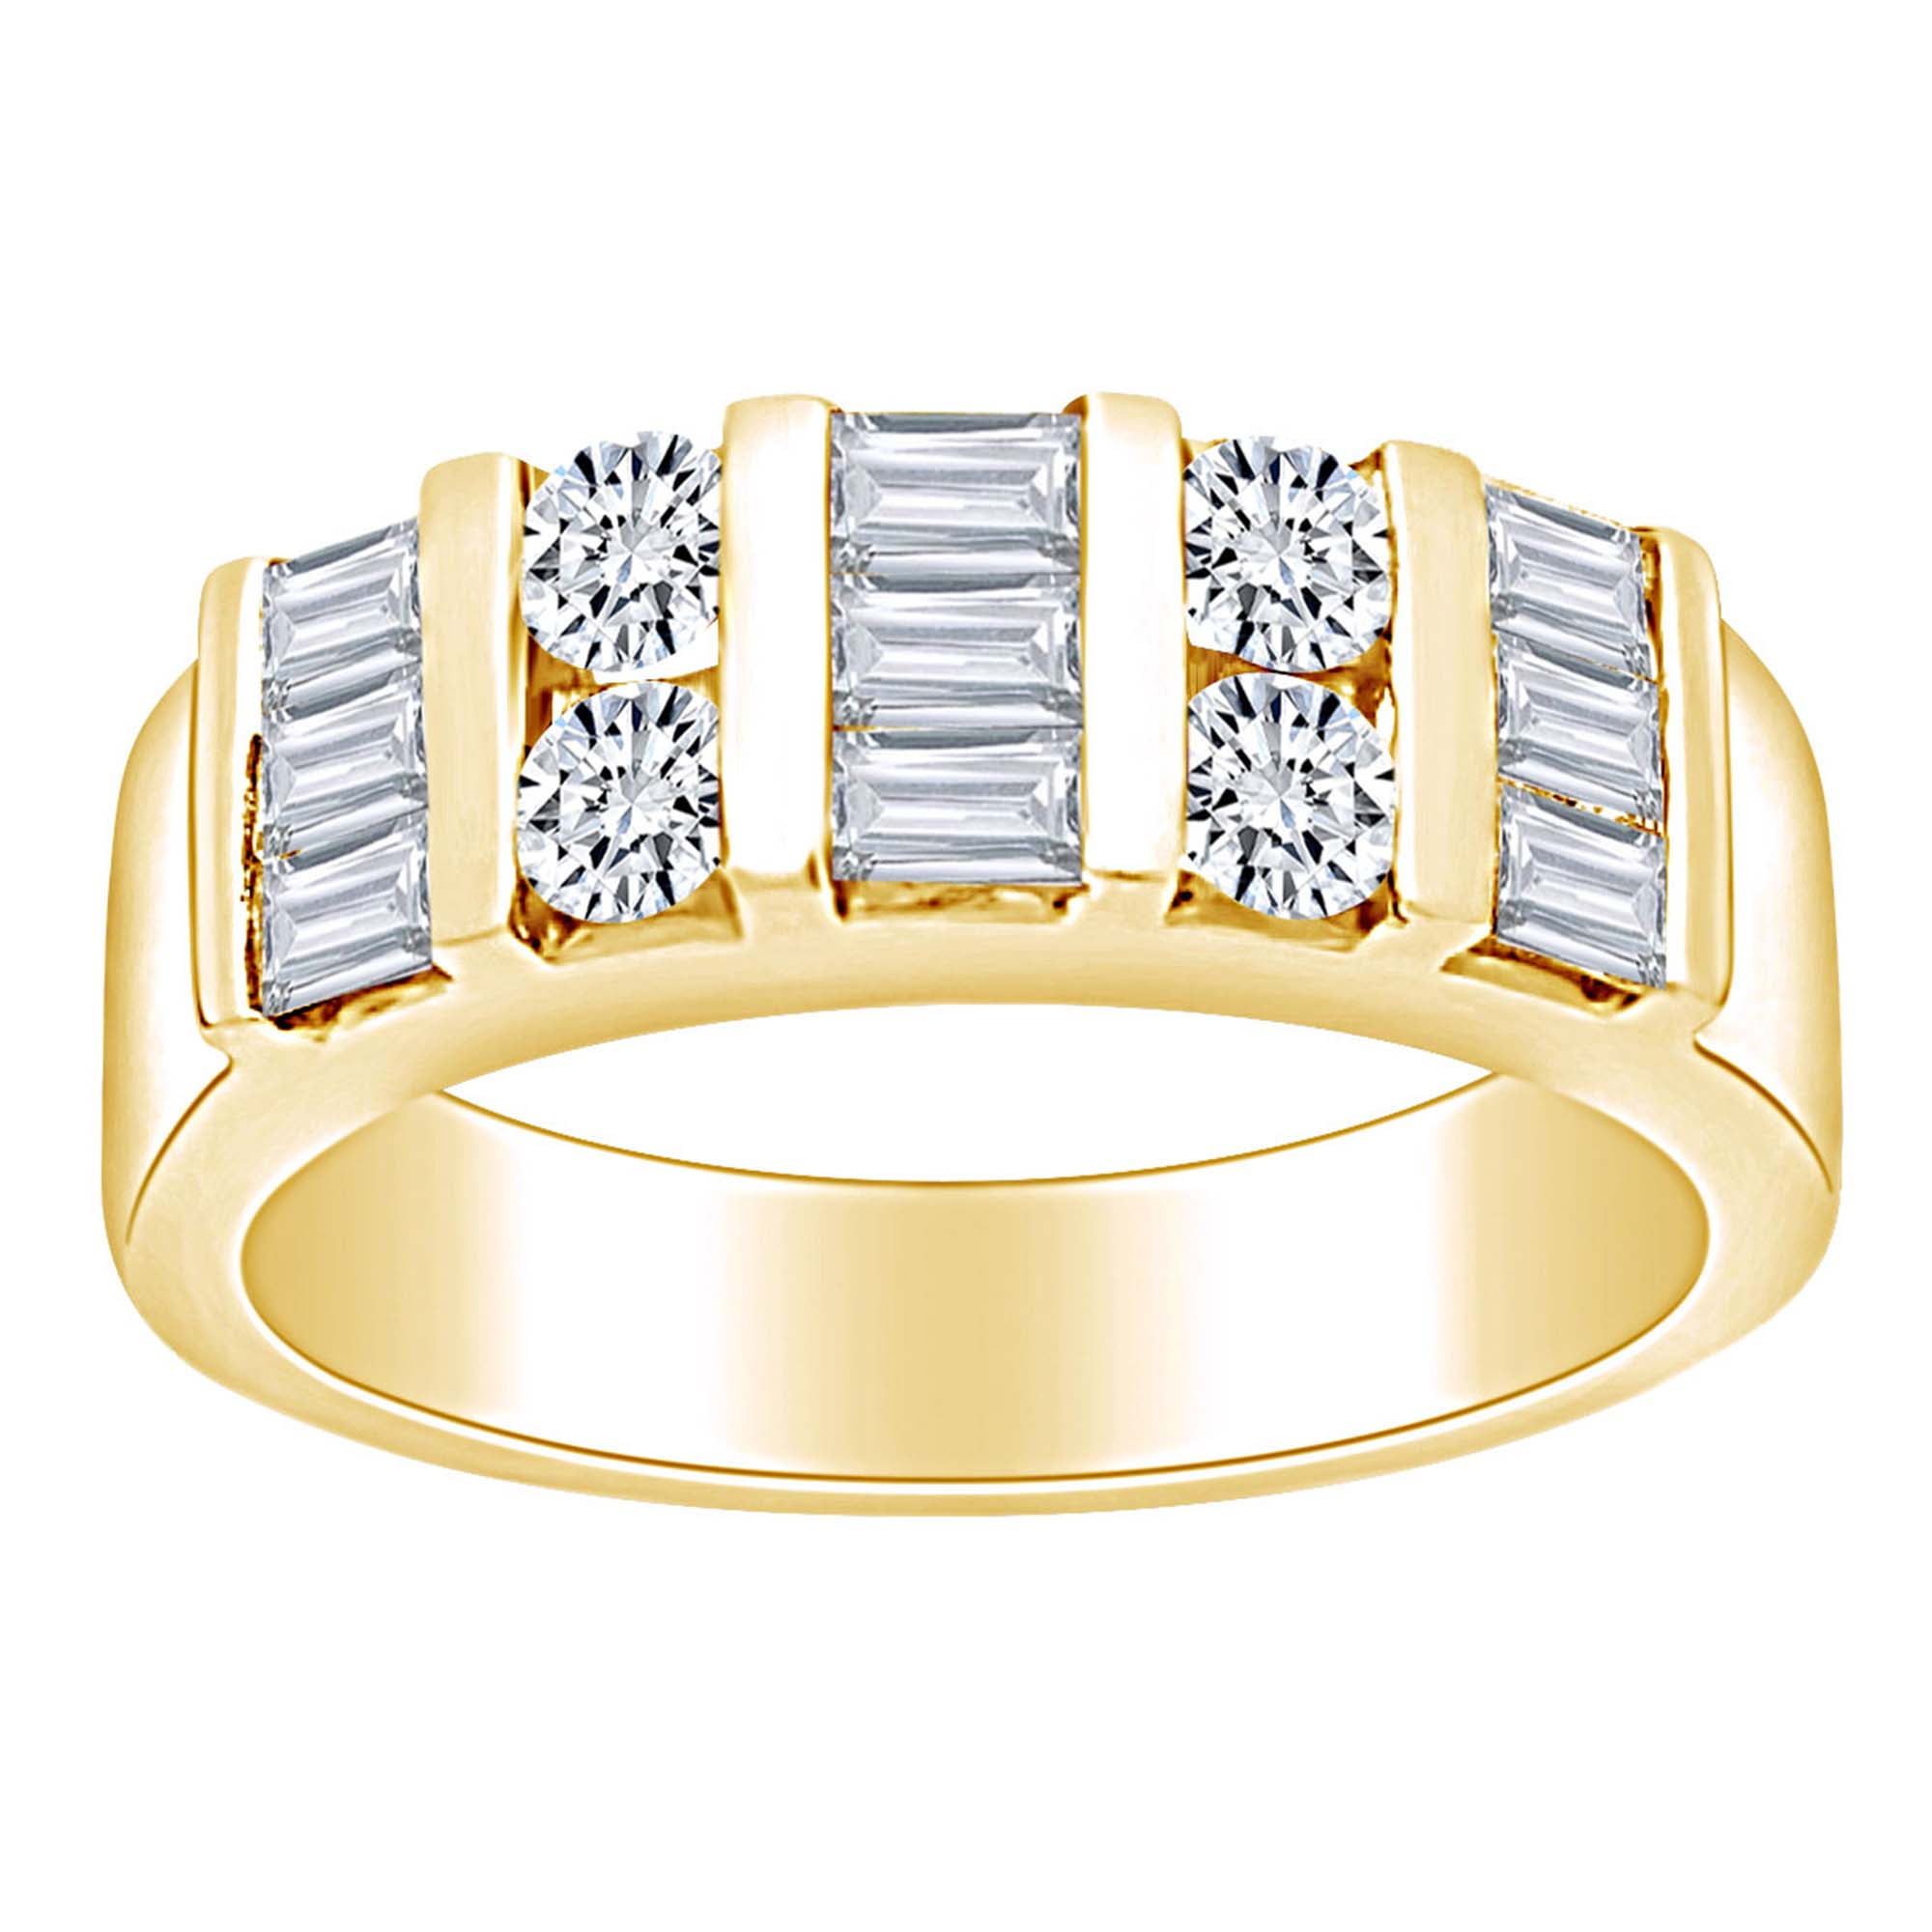 Details about   2 CT Round Cut Diamond Engagement Wedding Ring 14k Solid Yellow Gold Channel Set 